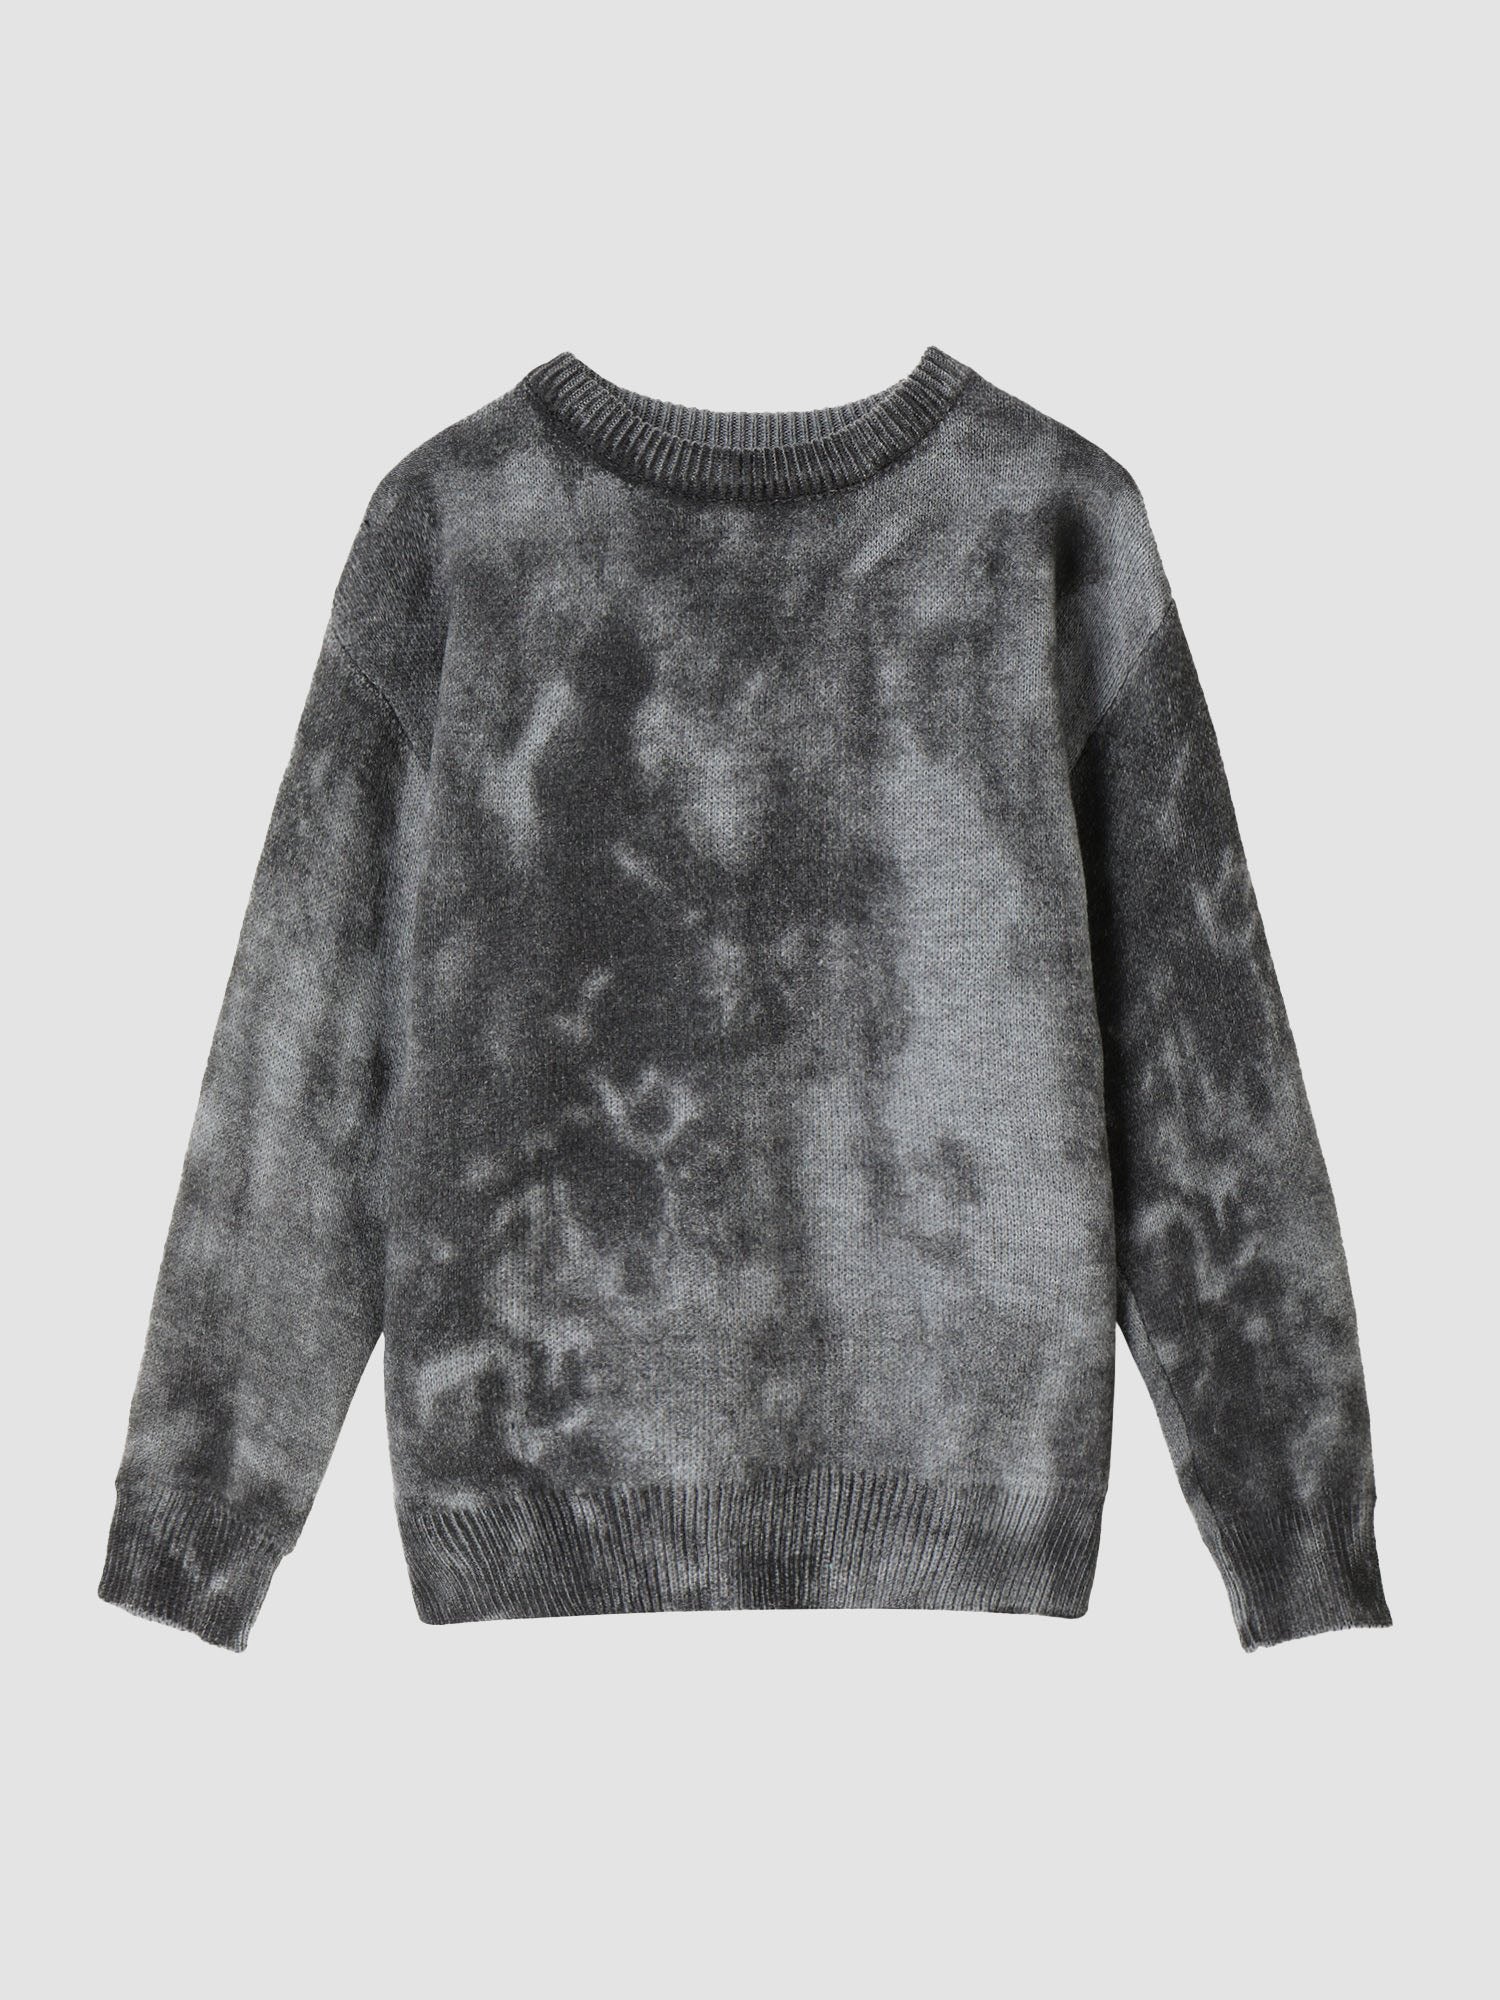 JUSTNOTAG Tie dye Round Neck Polyester Acrylic Sweaters